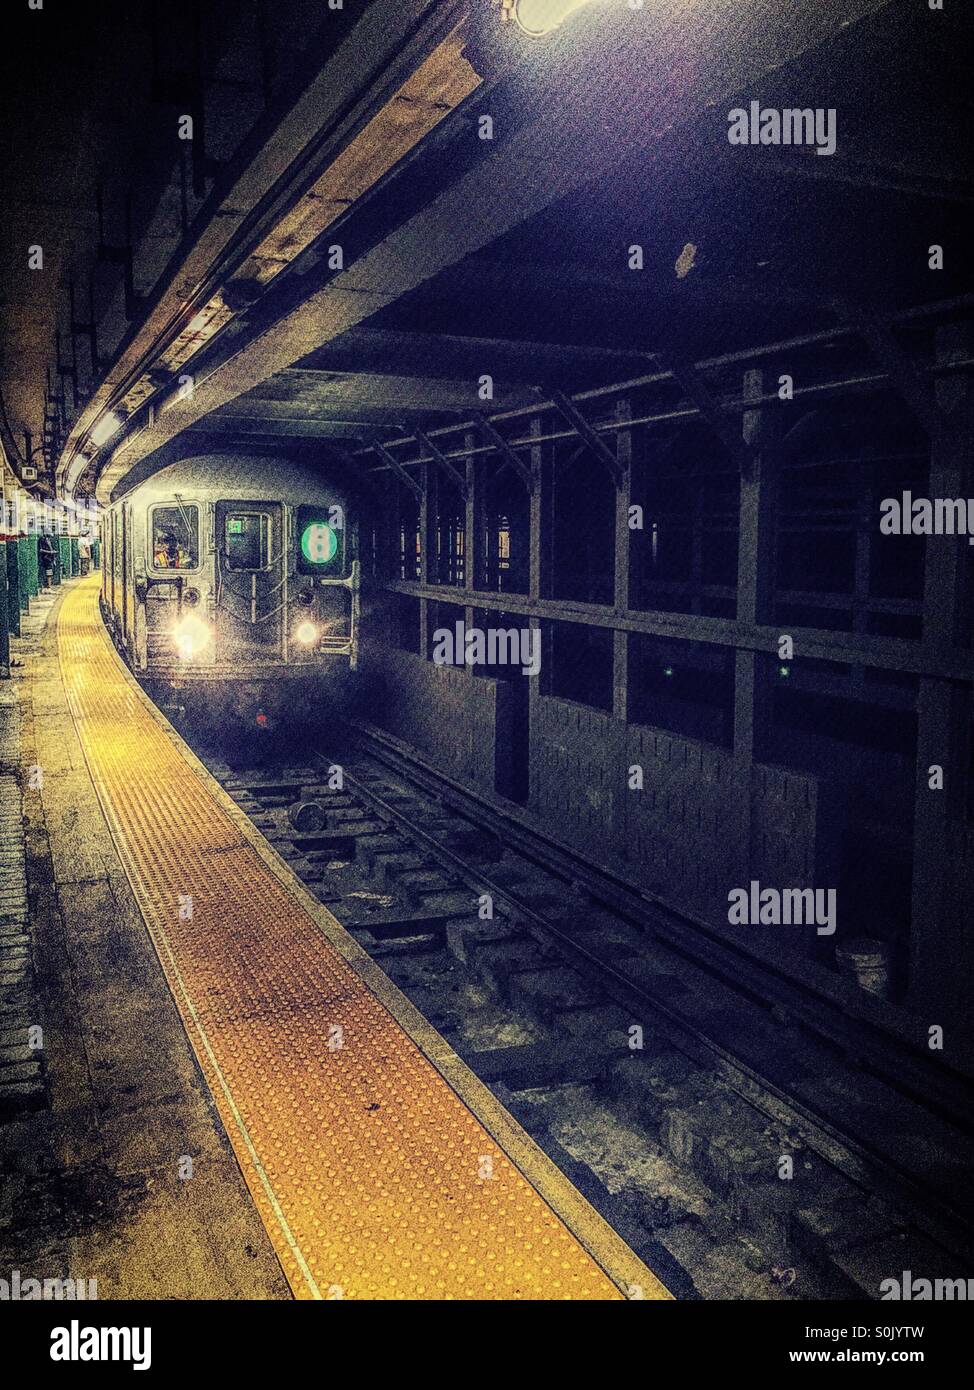 Six train arrives at Astor Place station, New York City. Stock Photo